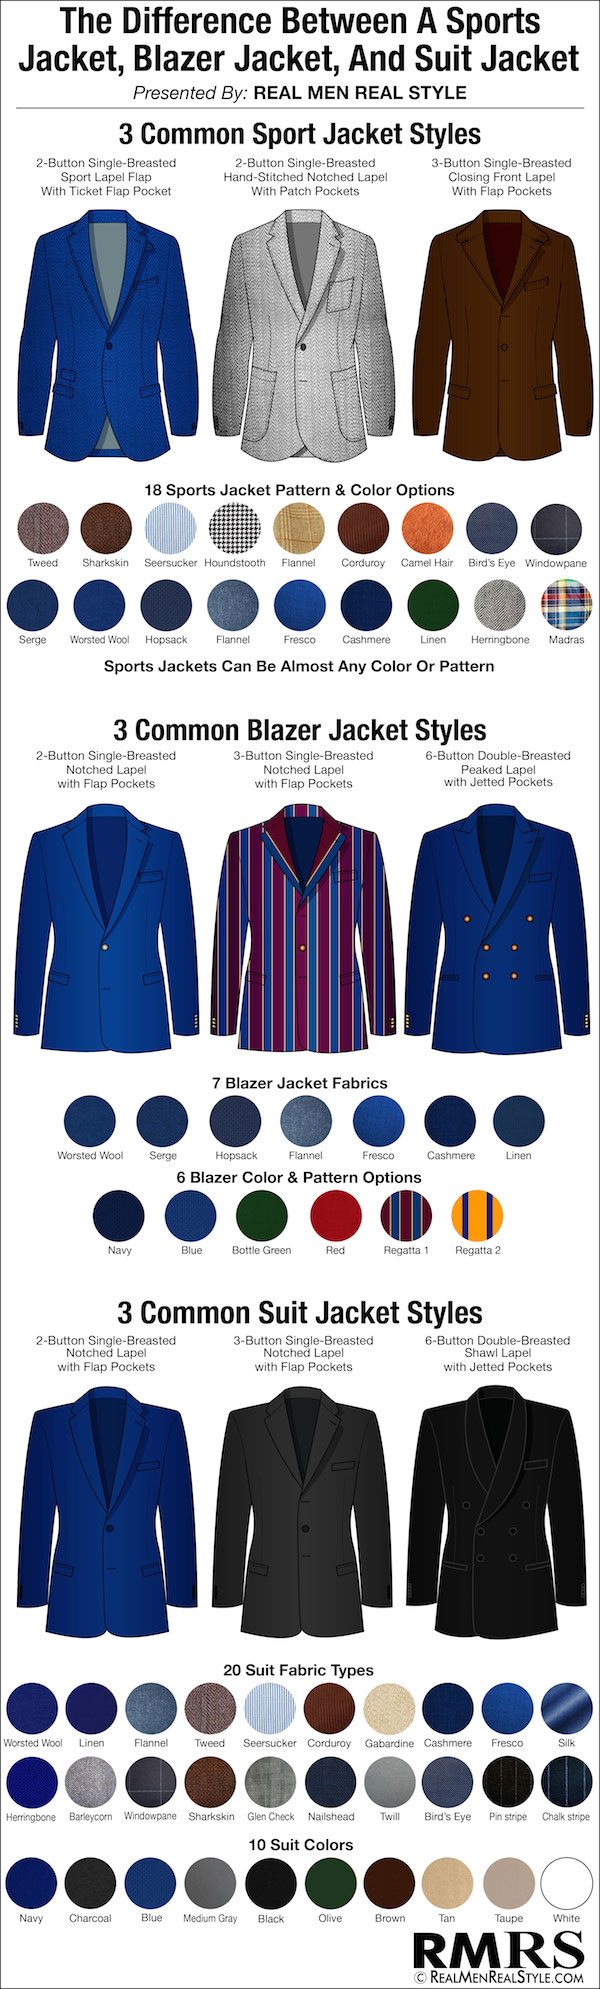 Sports Jacket - Blazer - Suit - What's The Difference?